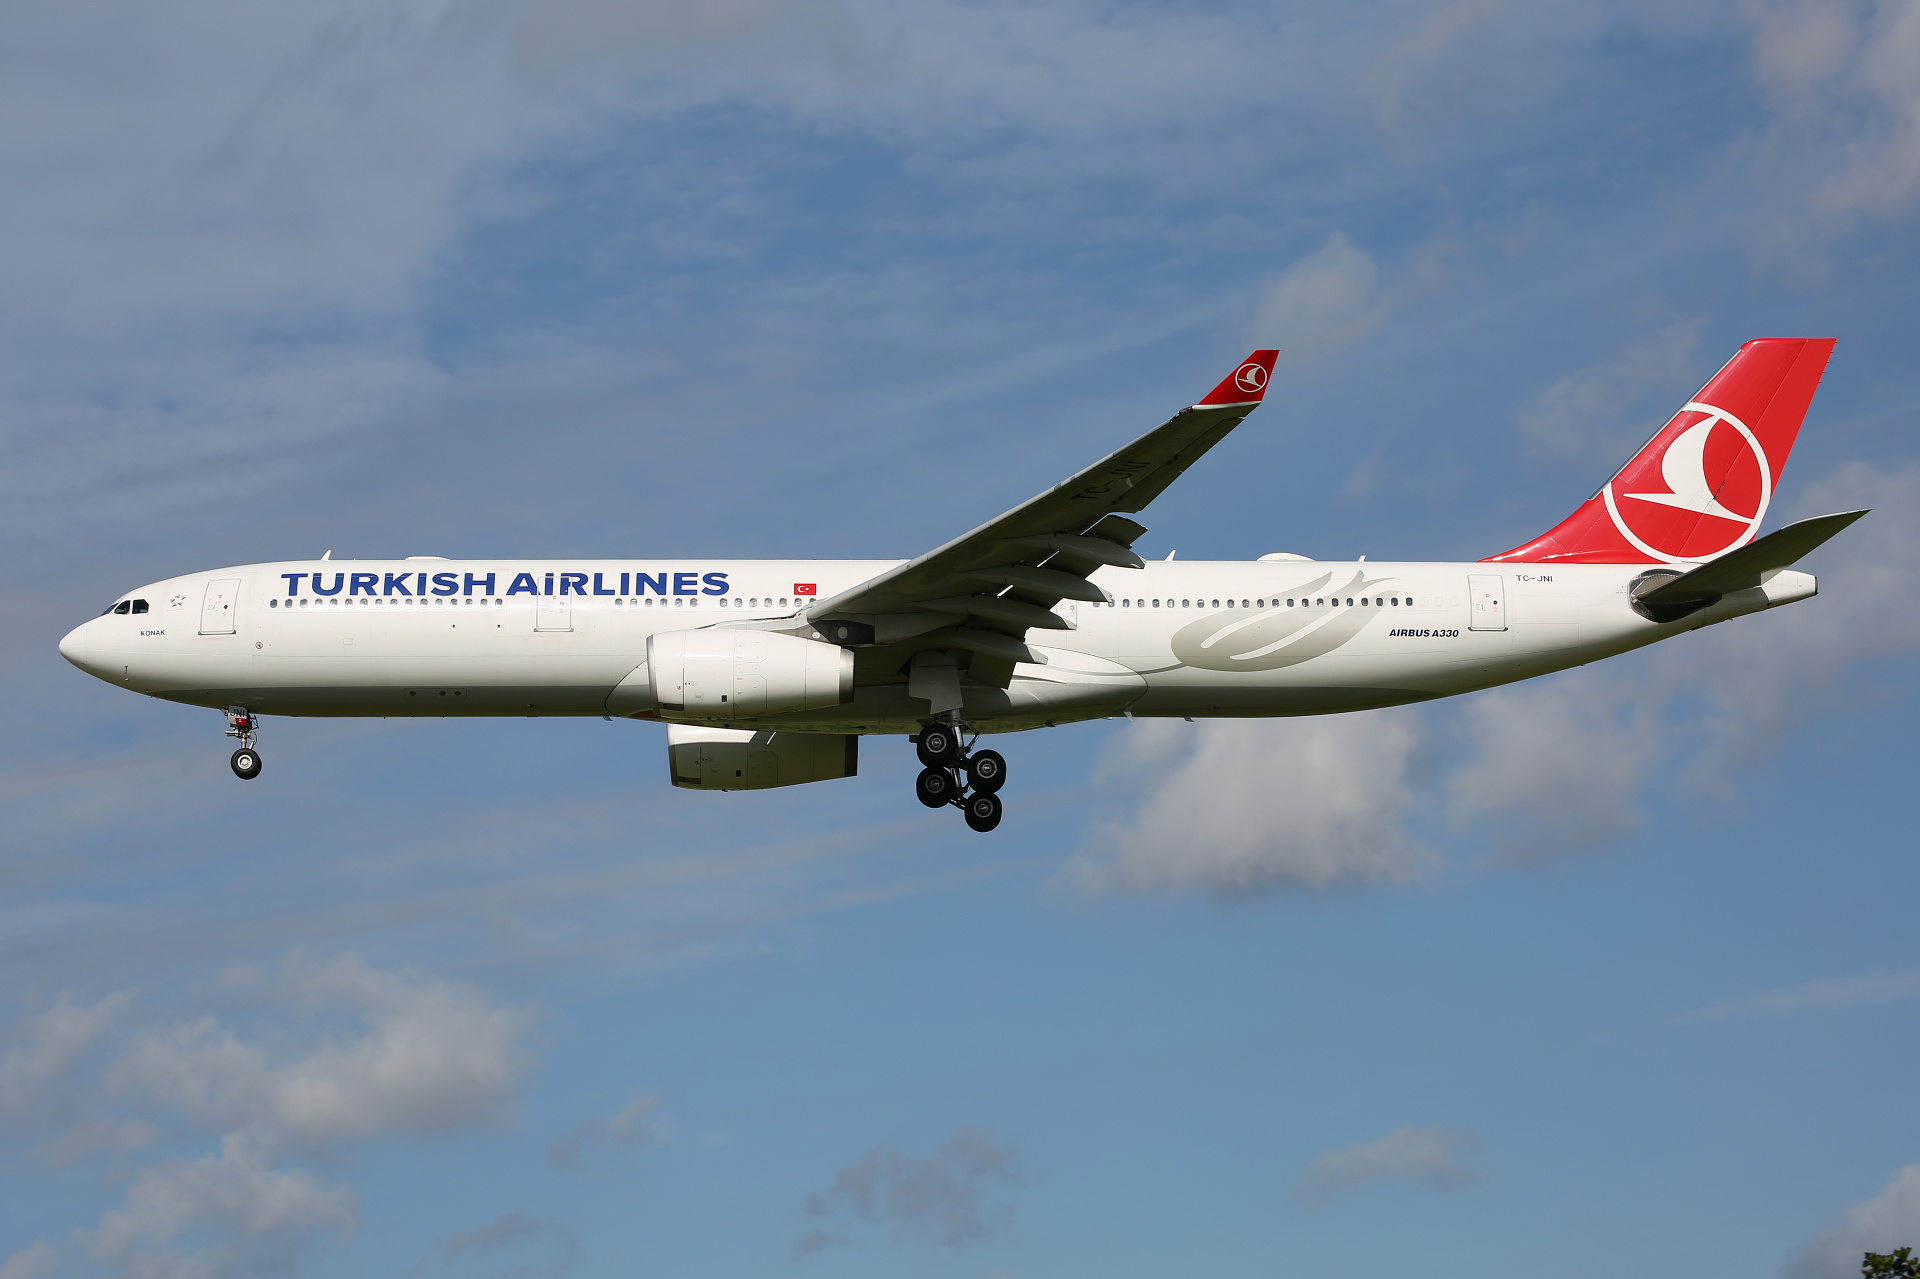 TC-JNI, THY Turkish Airlines (Aircraft » Schiphol Spotting » Airbus A330-300)